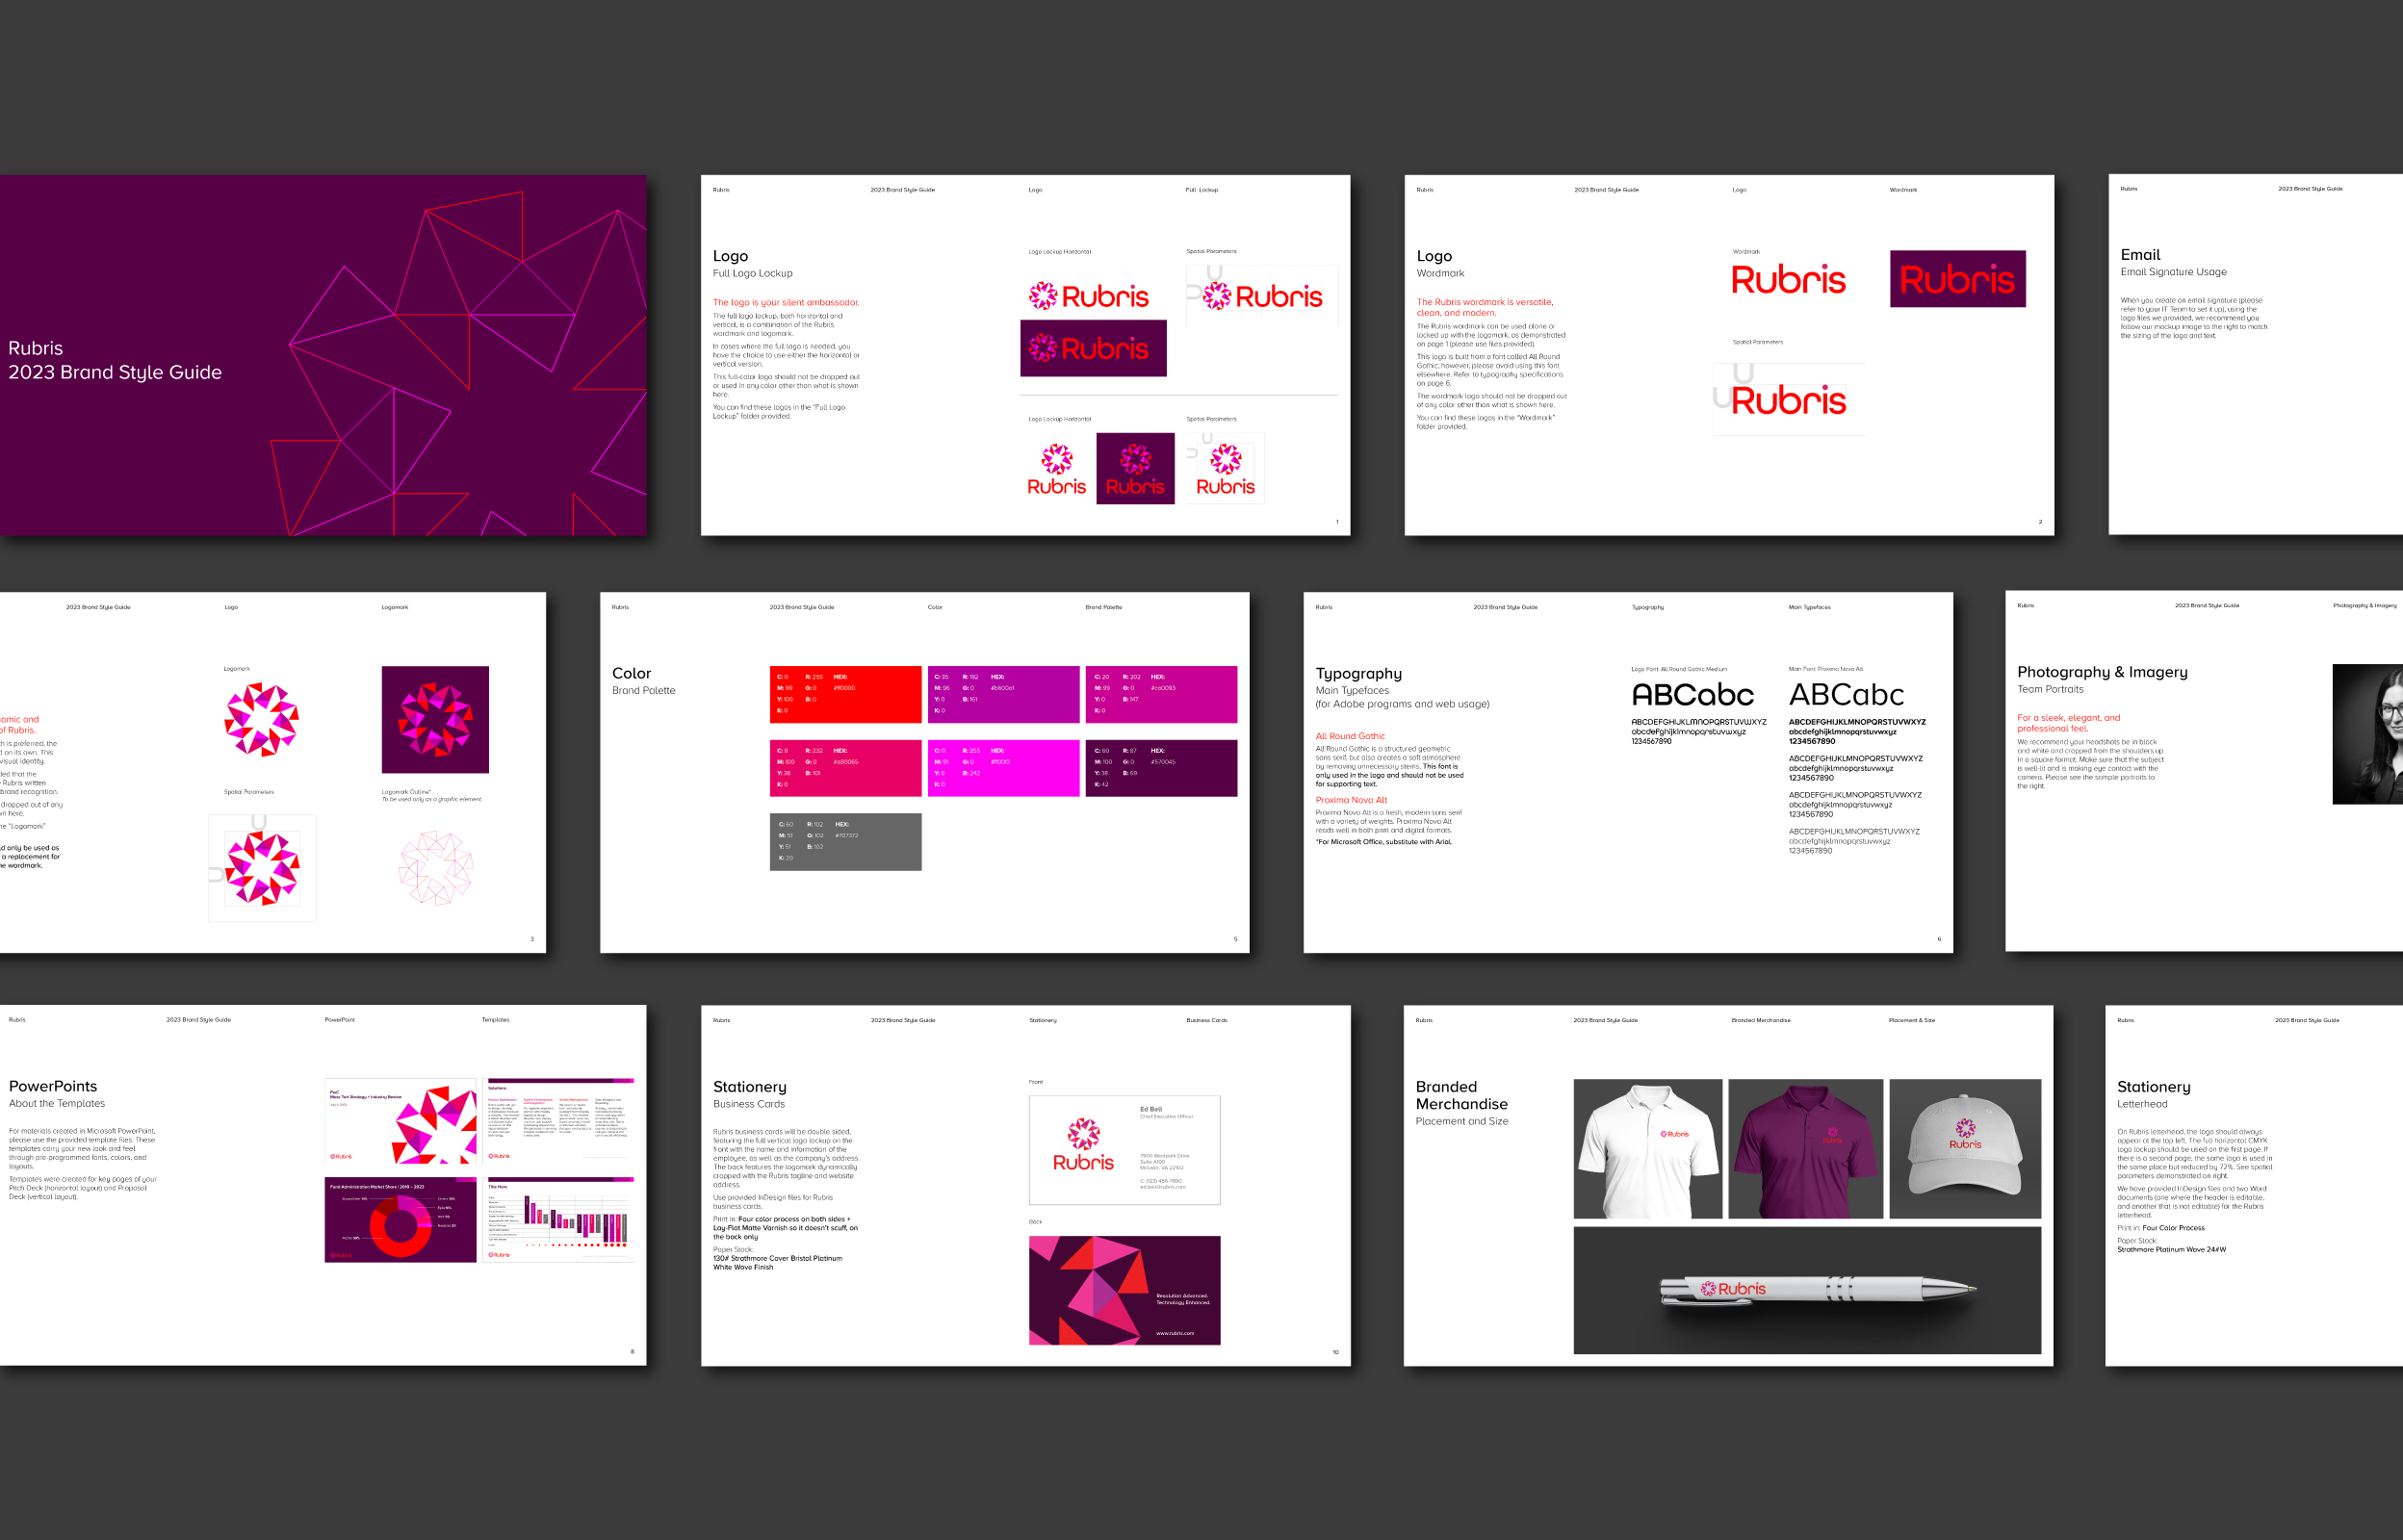 powerpoint slide with Rubris branding elements and color palette